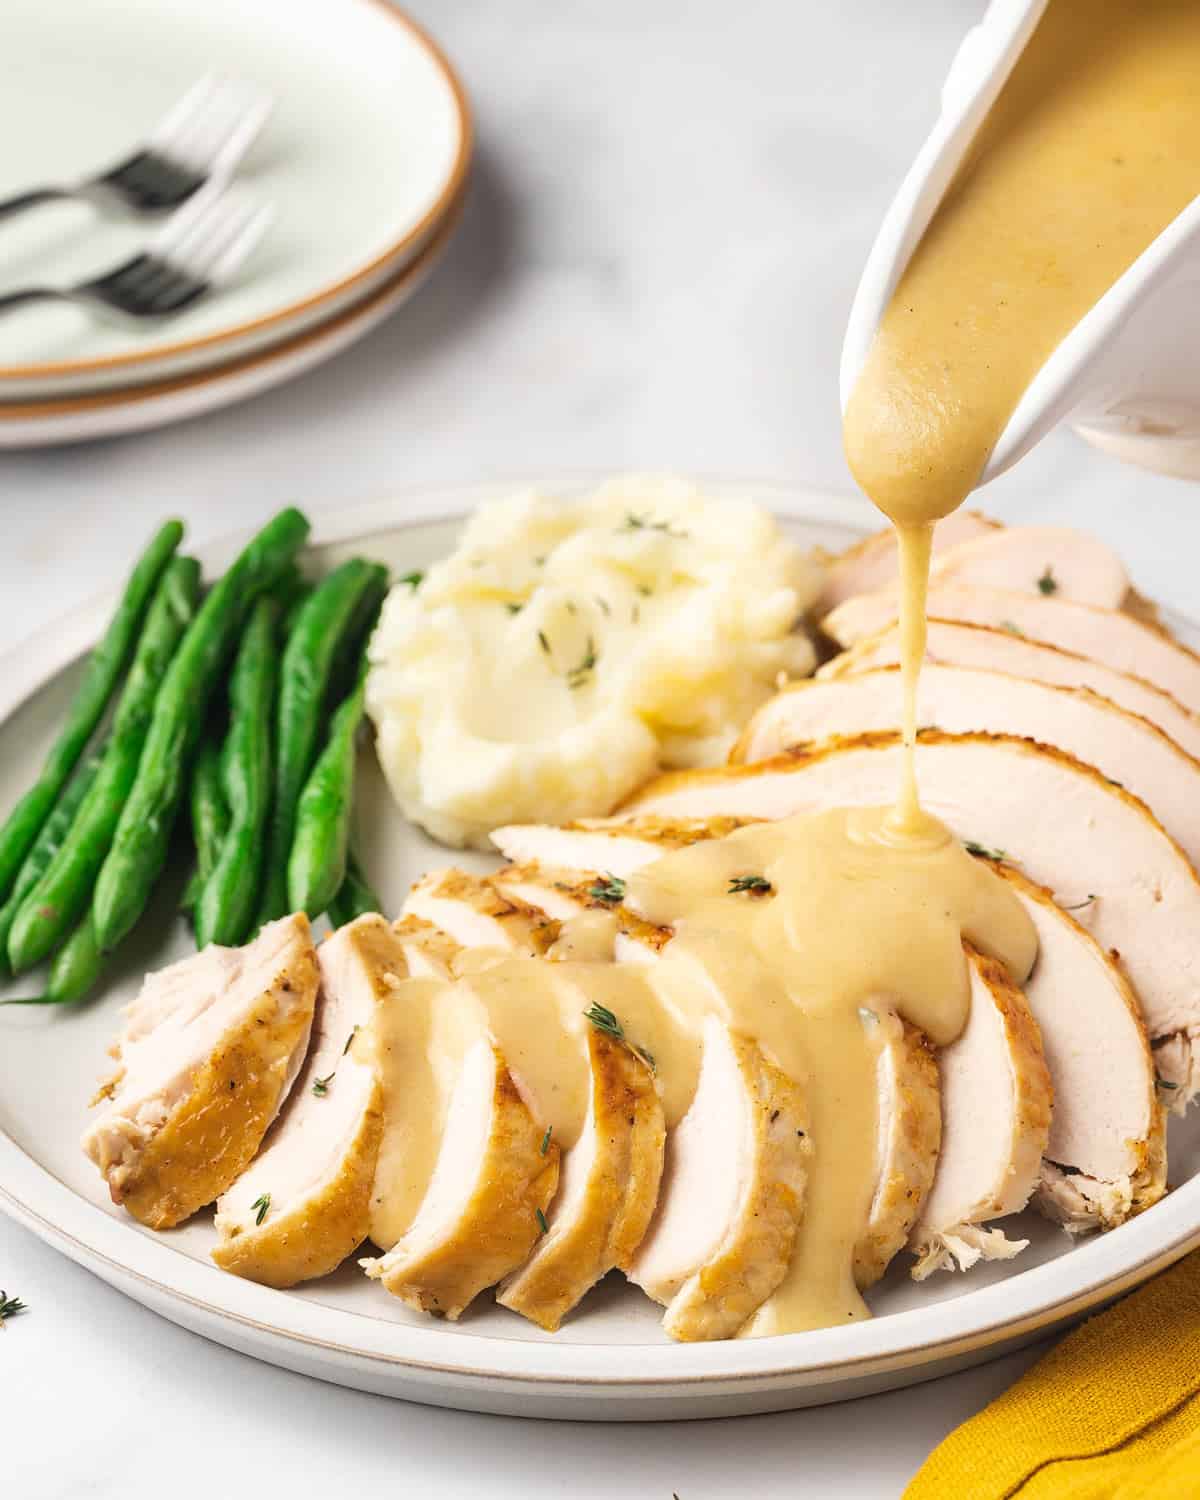 Gravy poured over a plate of sliced turkey breast cooked in a slow cooker with mashed potatoes and green beans on the same plate.